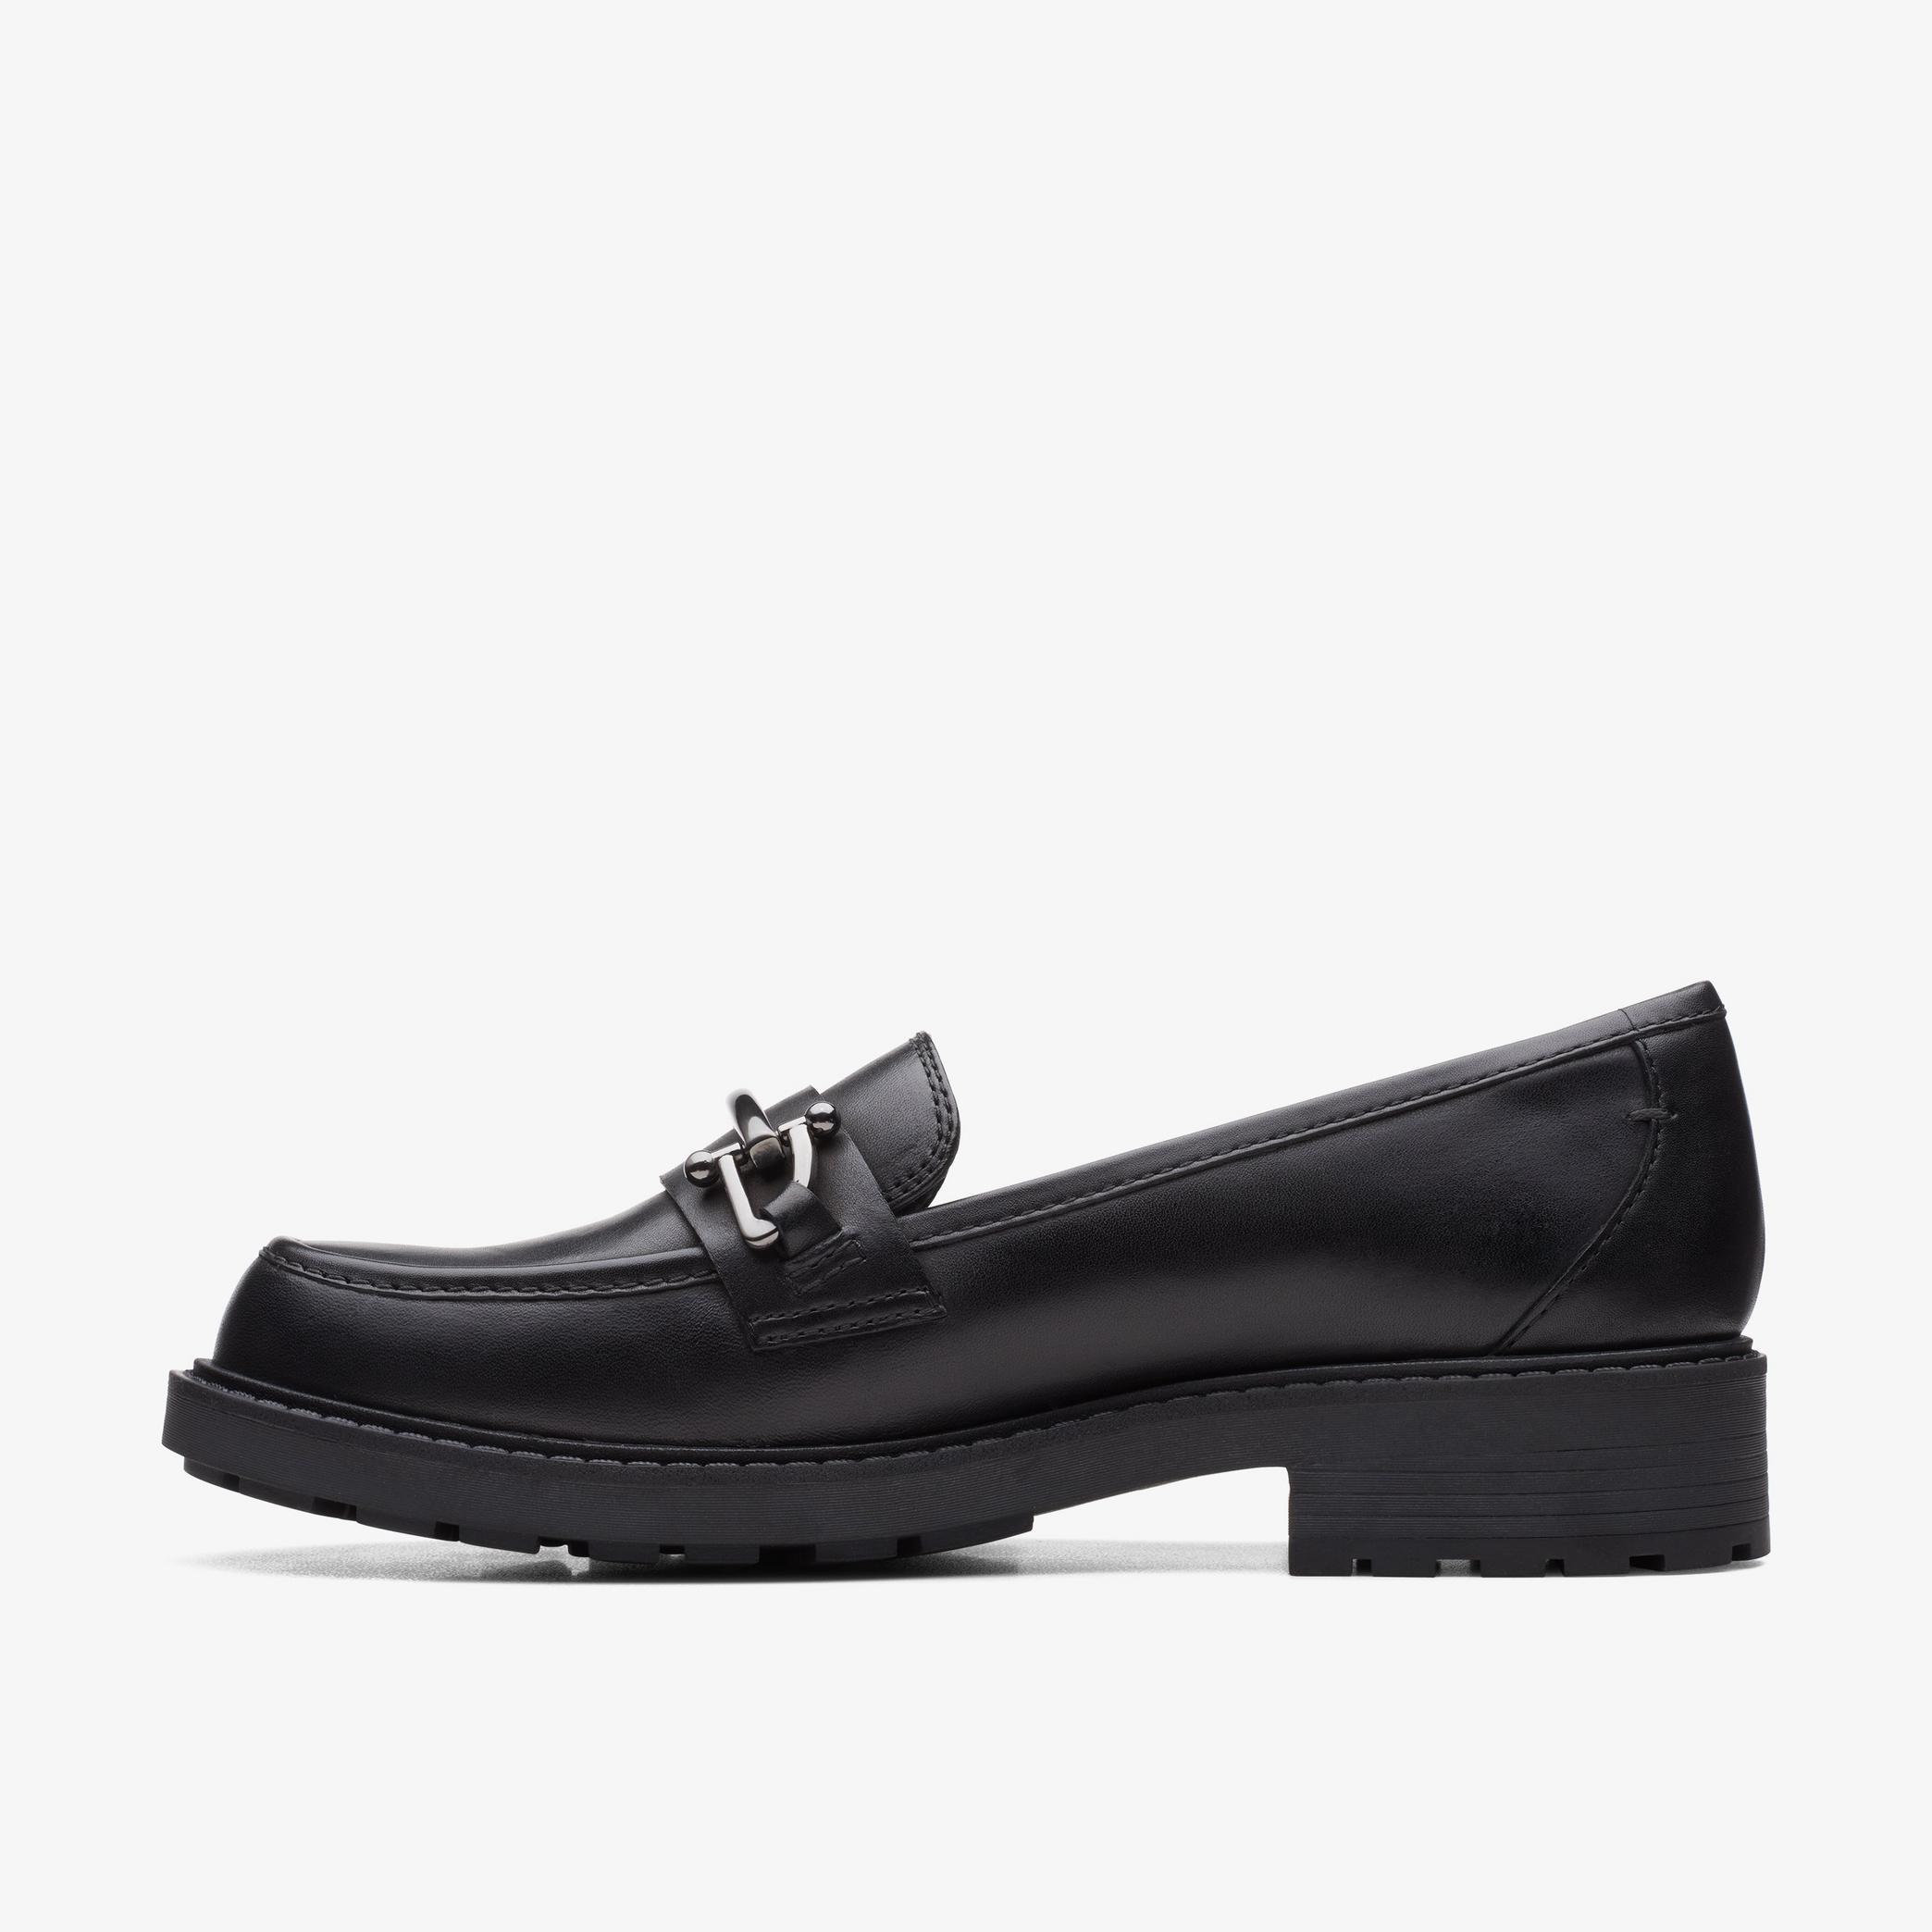 Orinoco2 Edge Black Leather Loafers, view 2 of 6